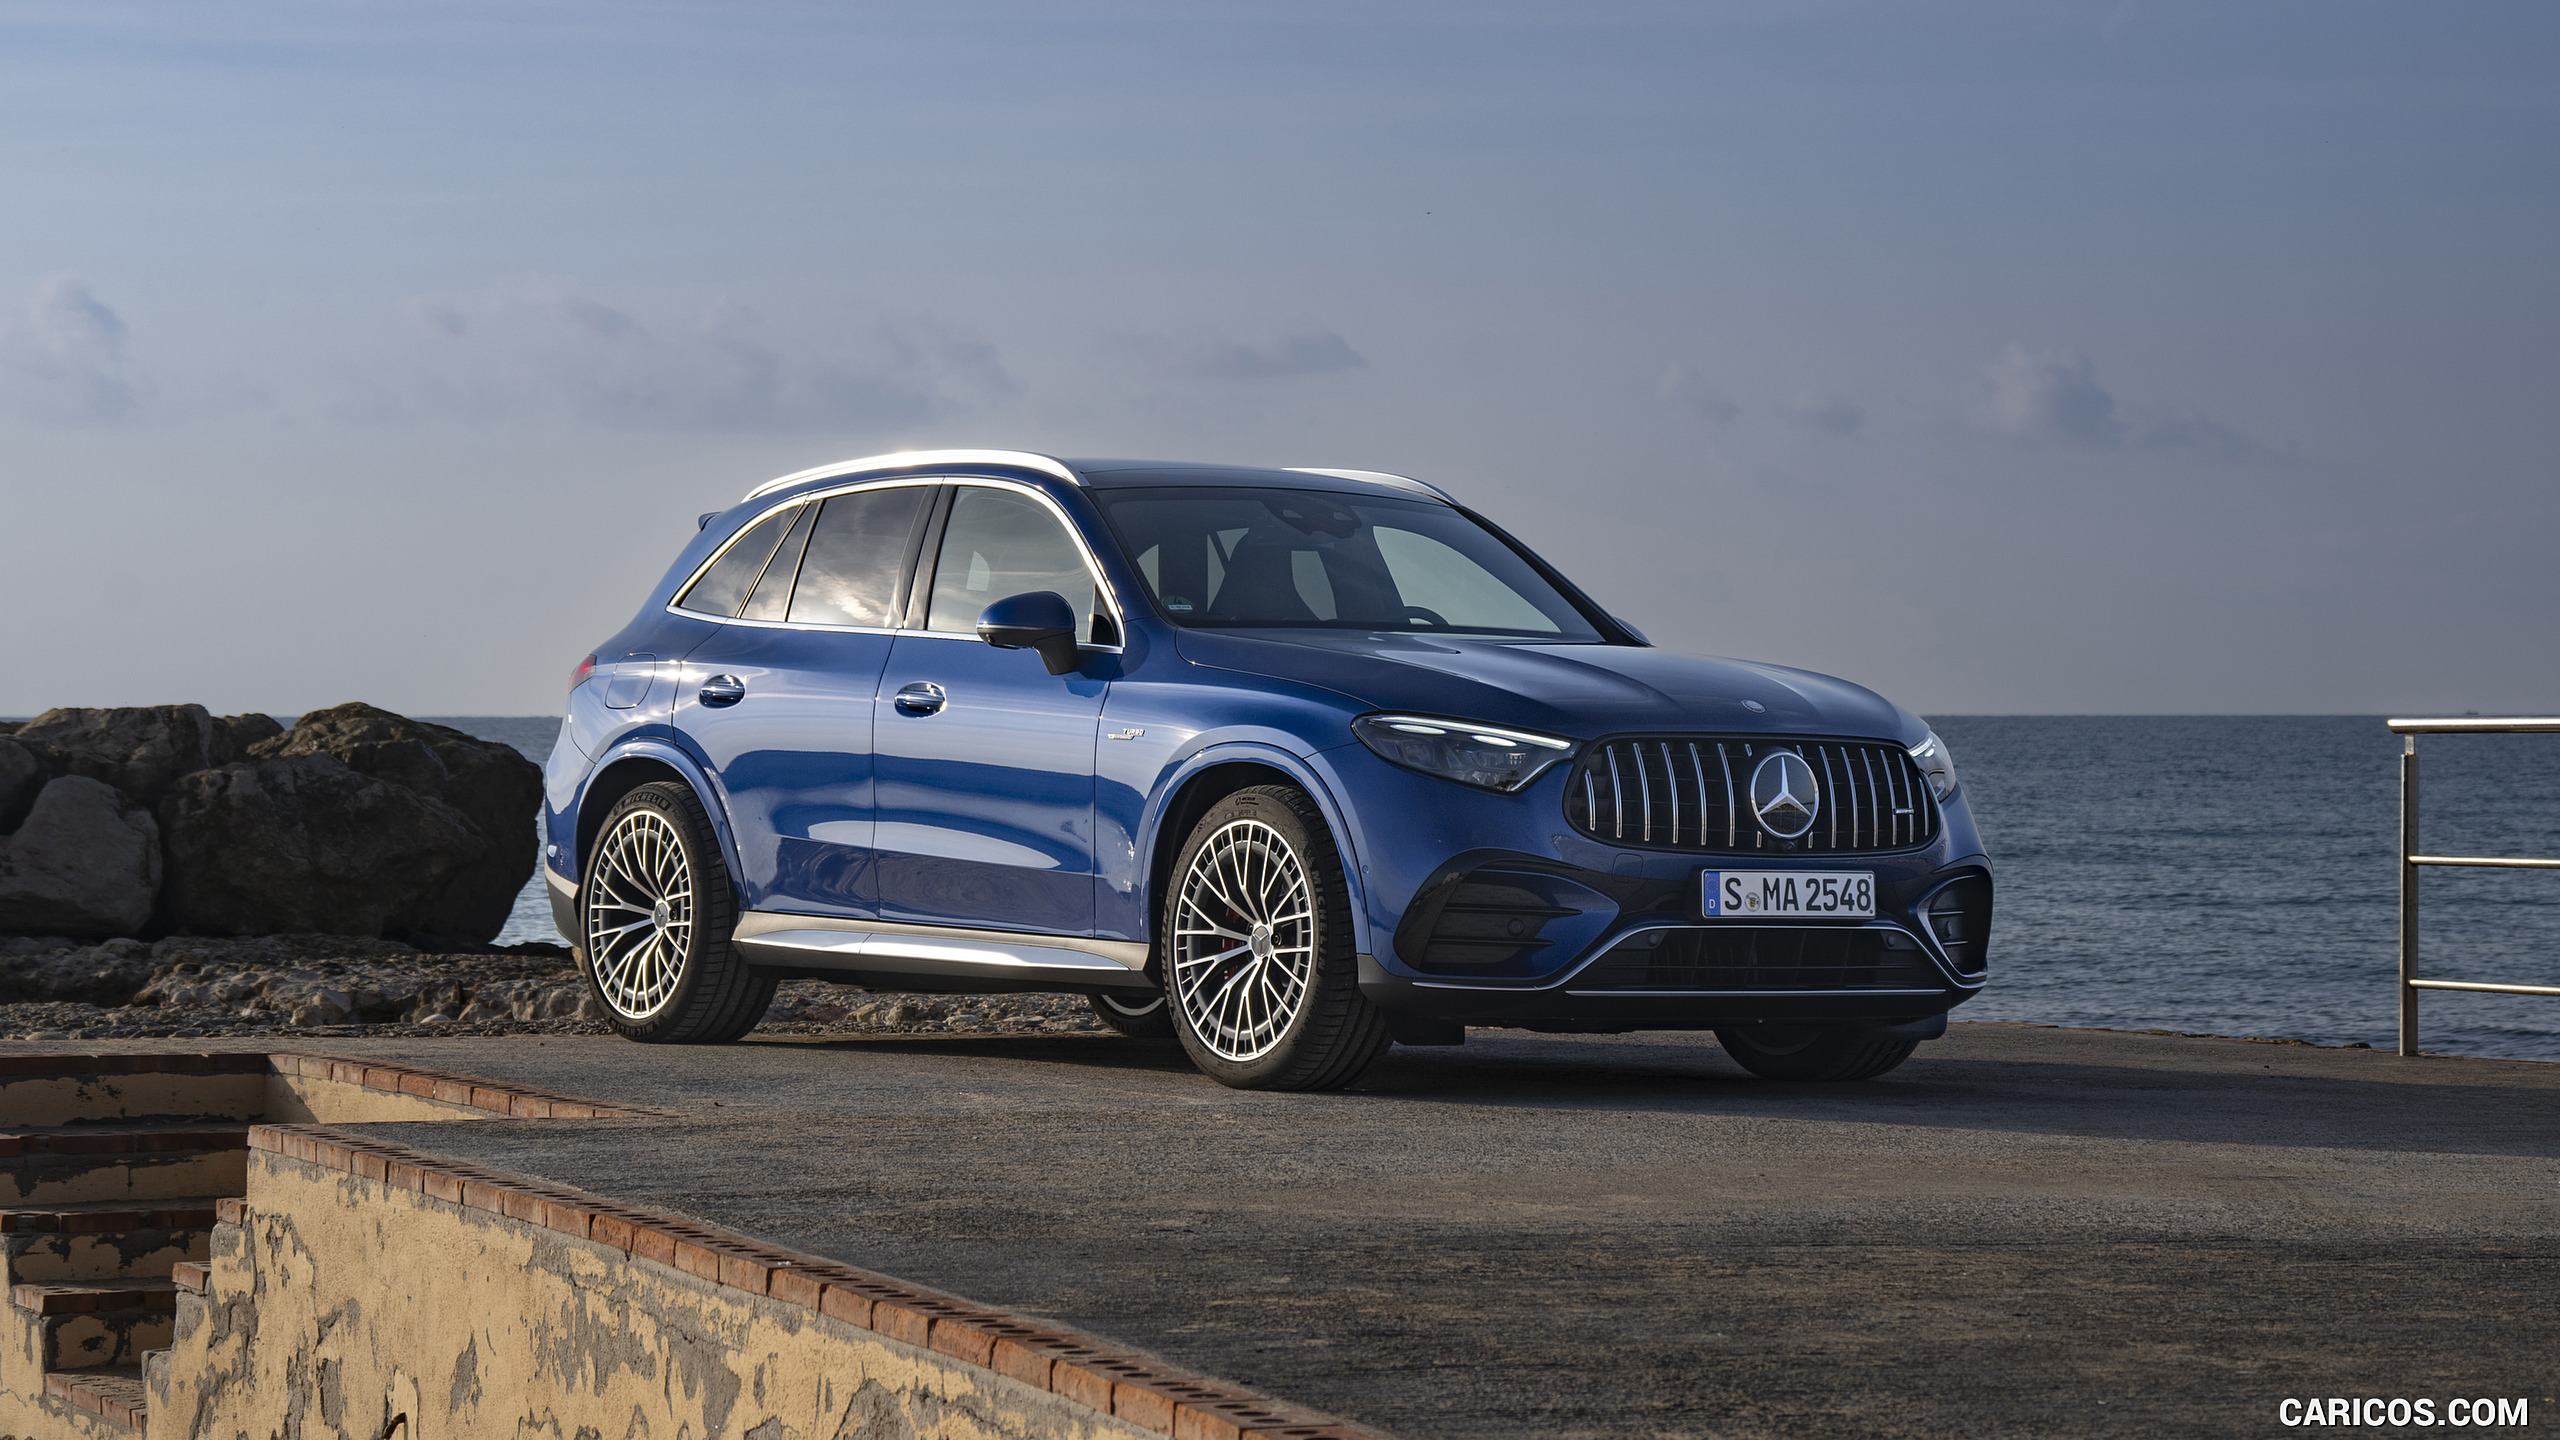 2025 Mercedes-AMG GLC 63 S E PERFORMANCE (Color: Spectral Blue Metallic) - Front Three-Quarter, #23 of 210